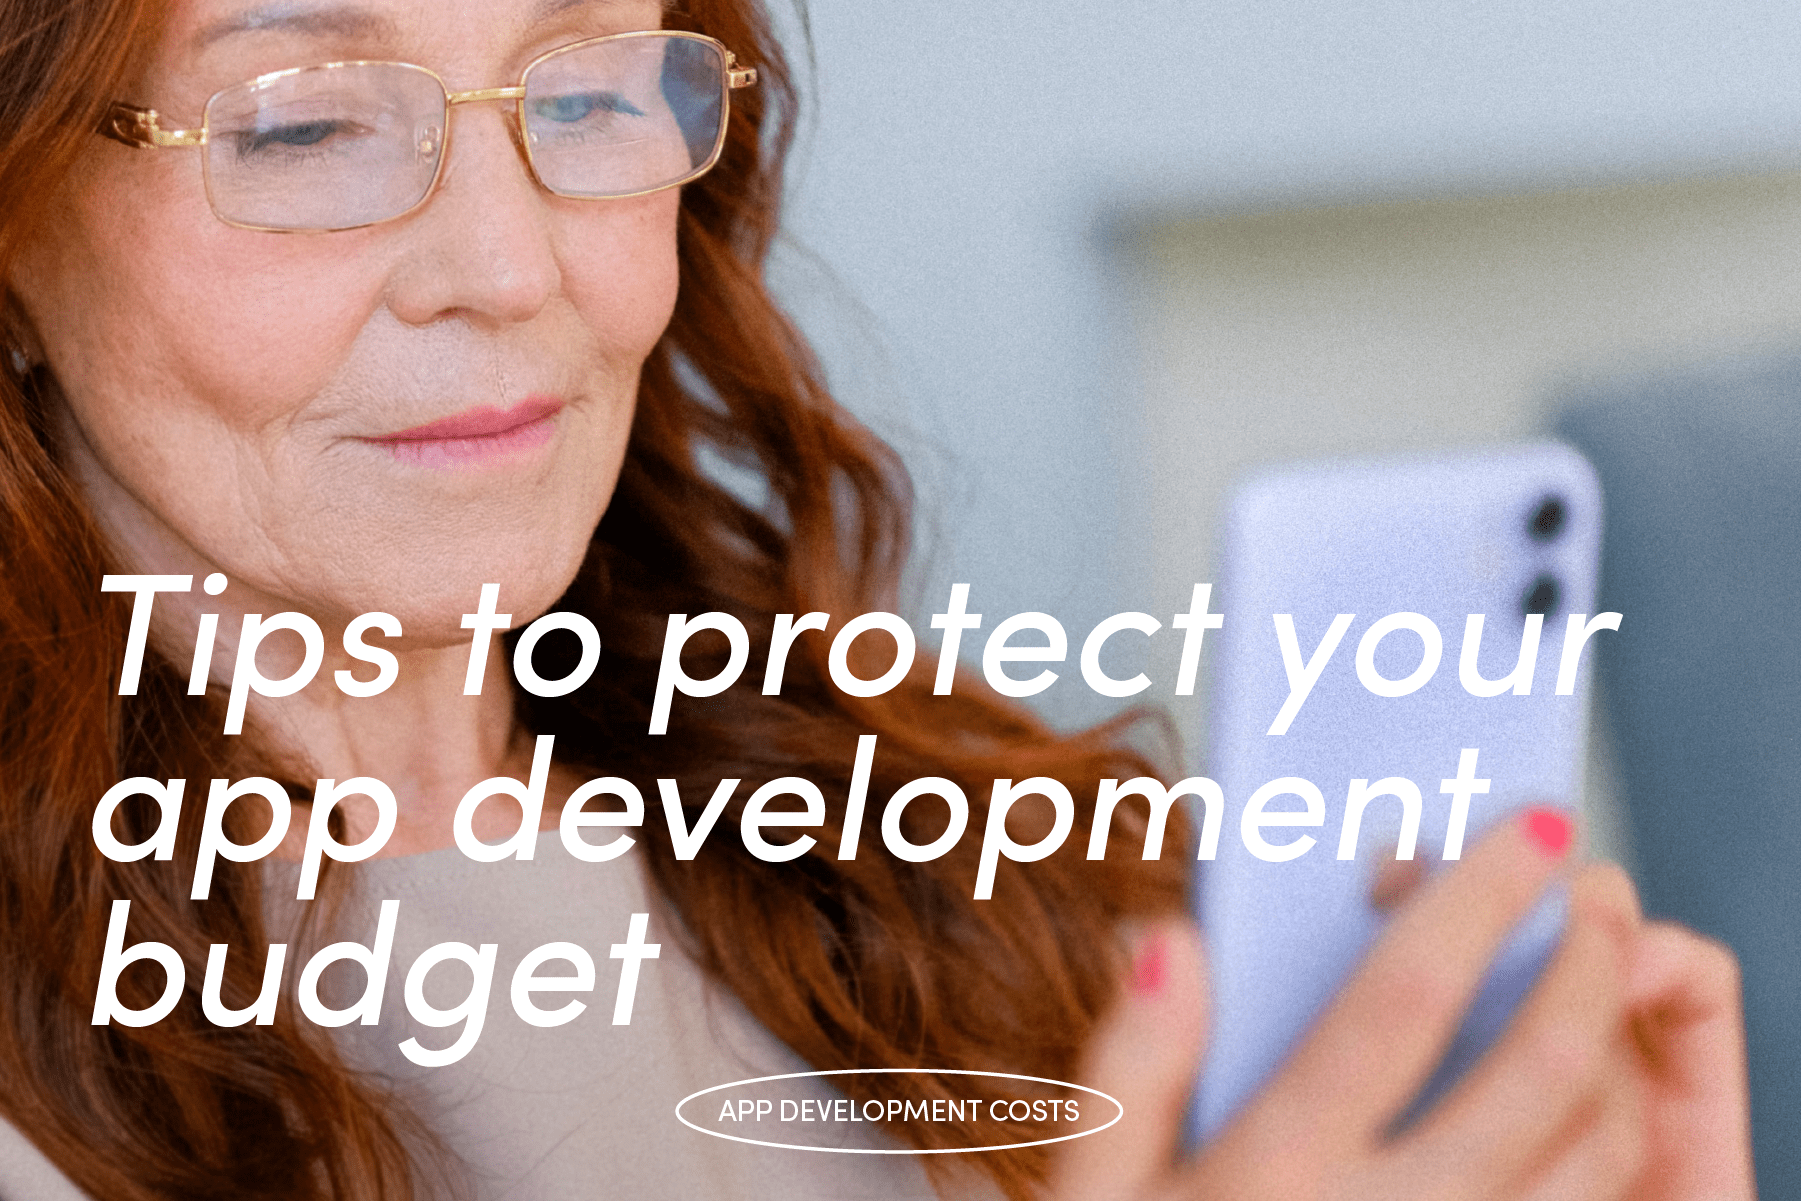 Tips to Protect Your App Budget